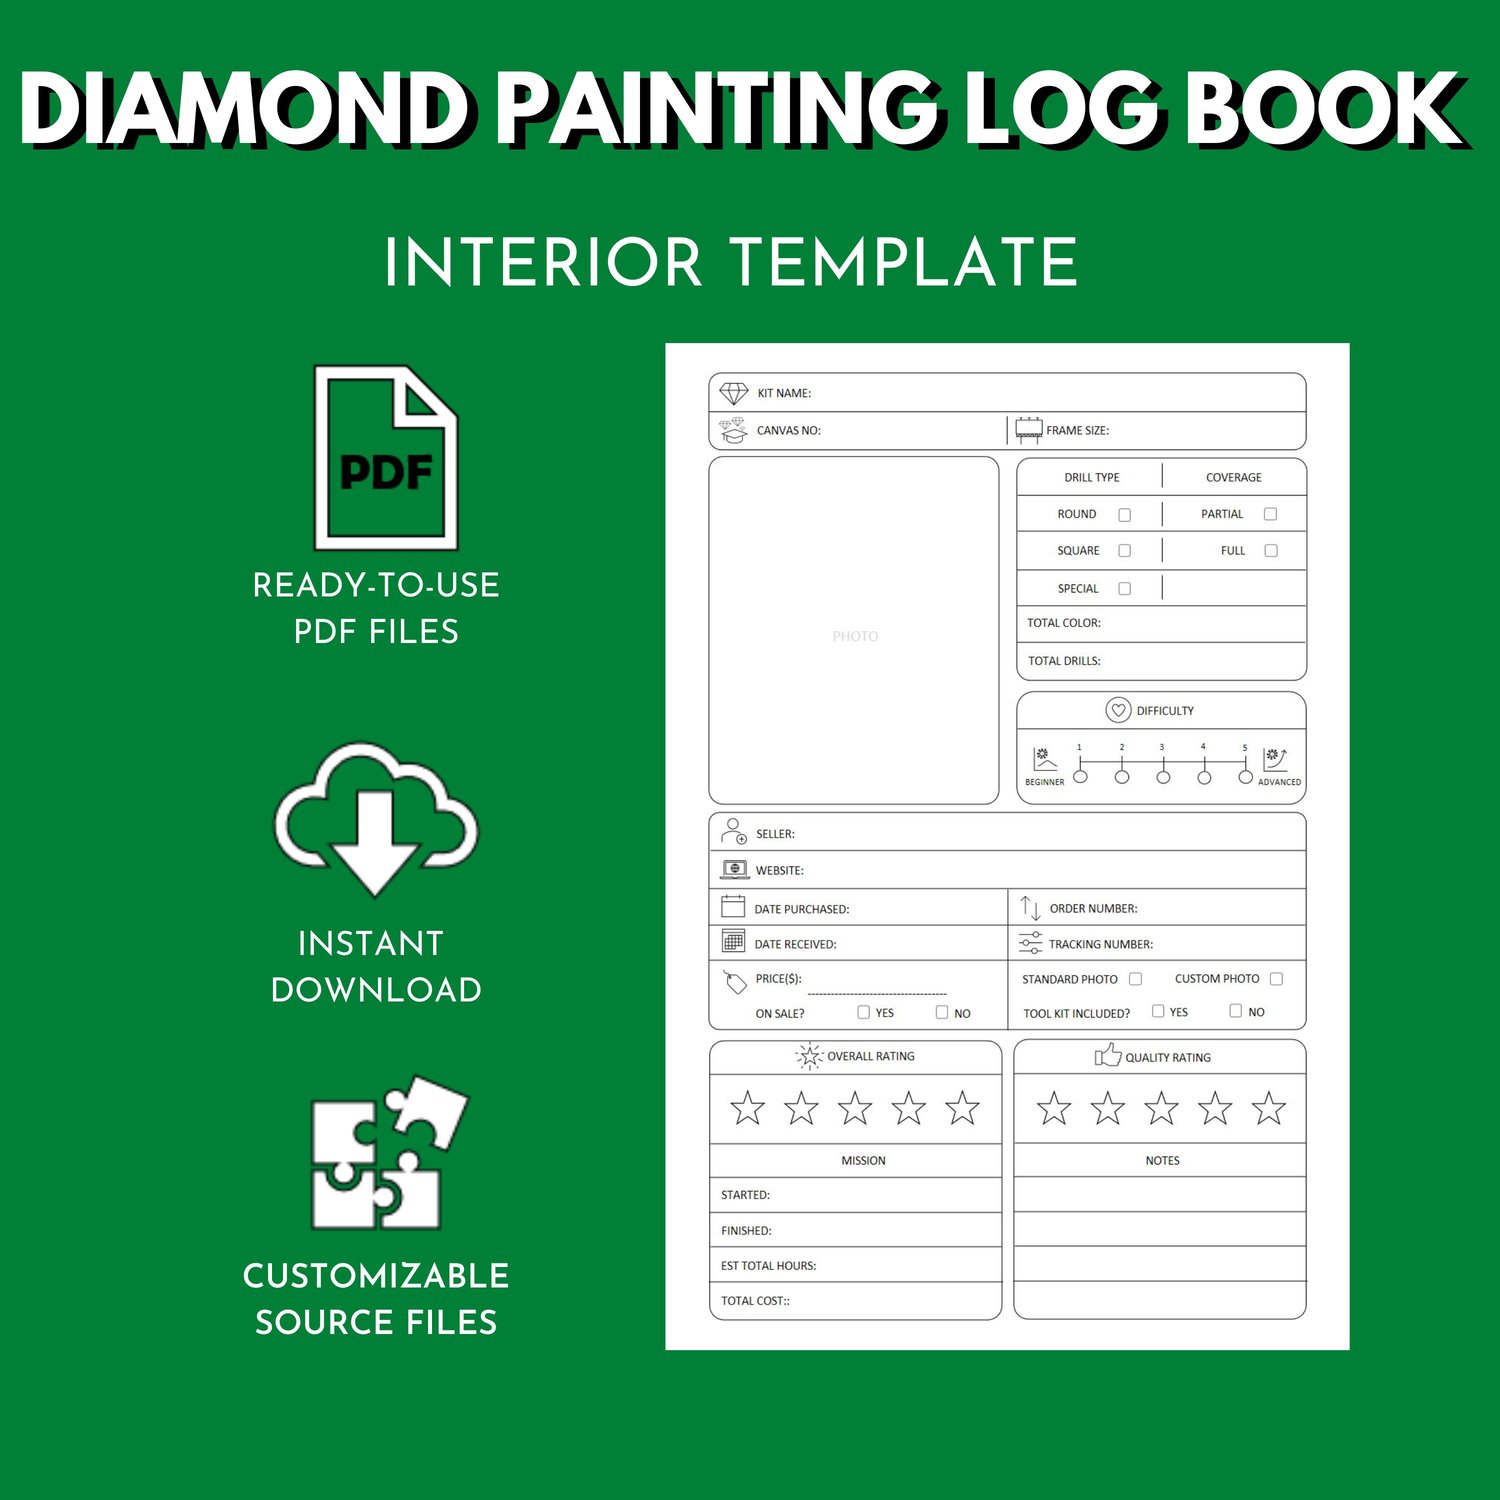 Diamond Painting Log Book  KDP Interior Template for Low